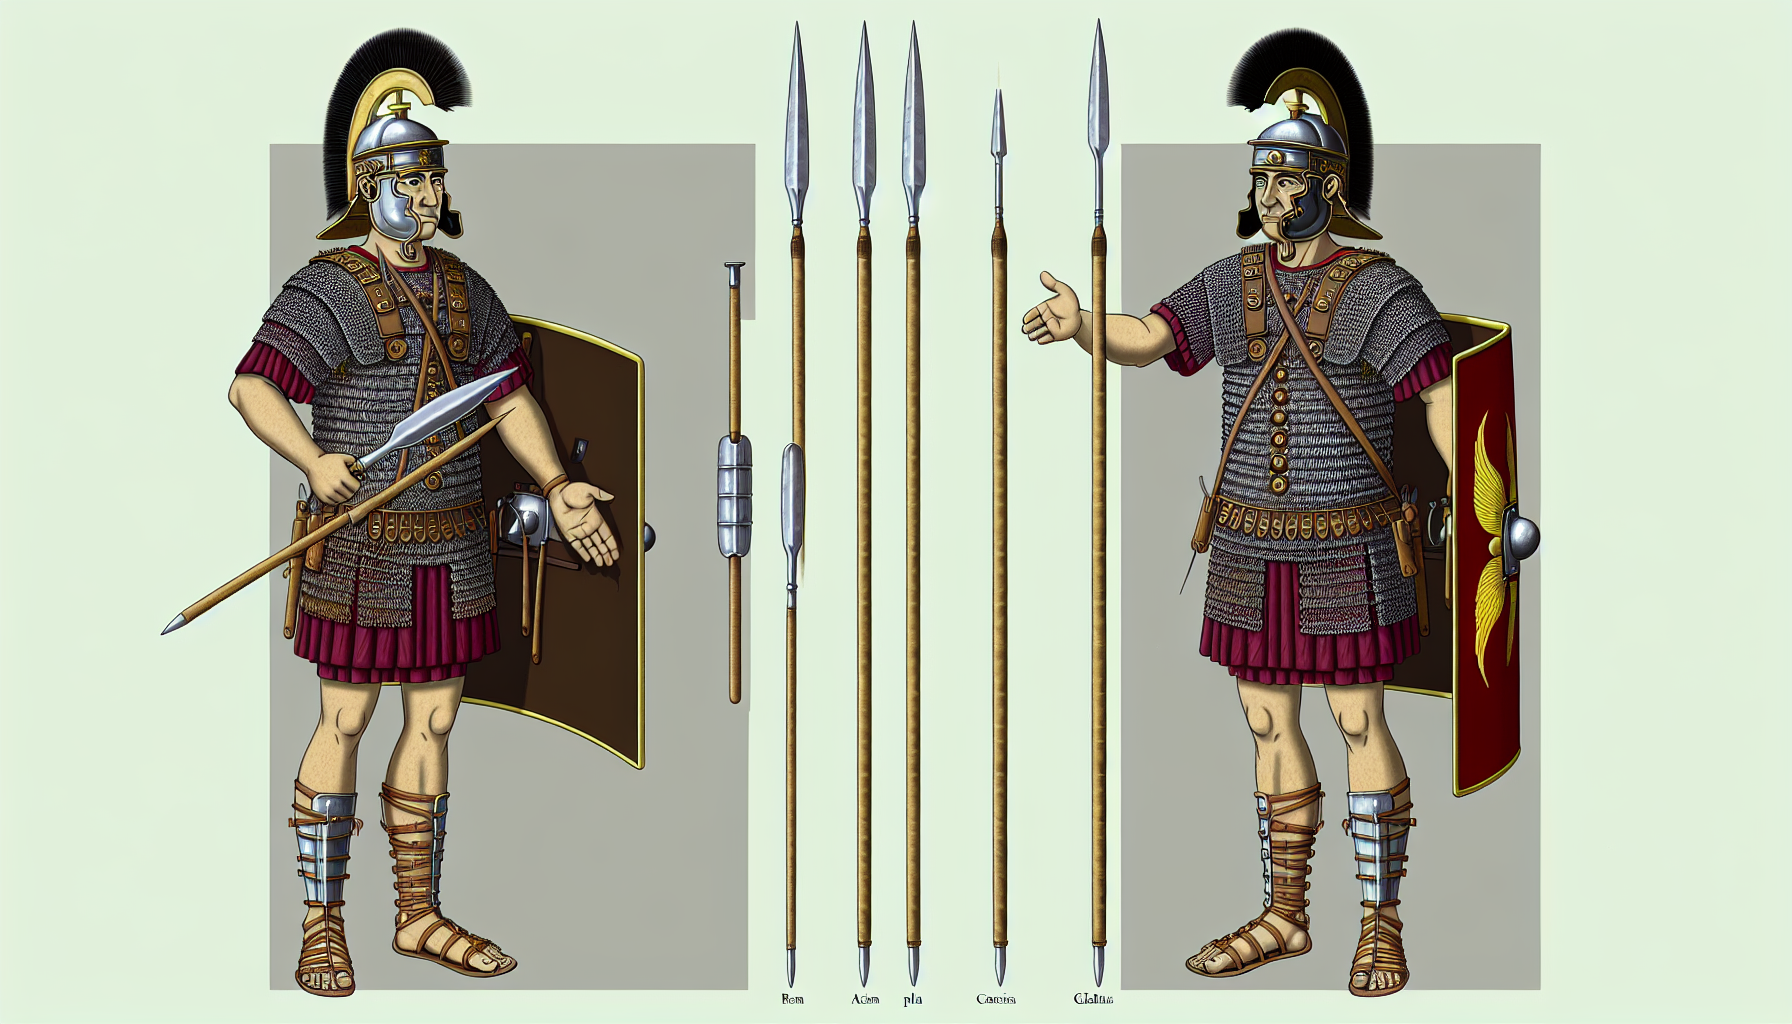 Roman Principes with their standard weaponry